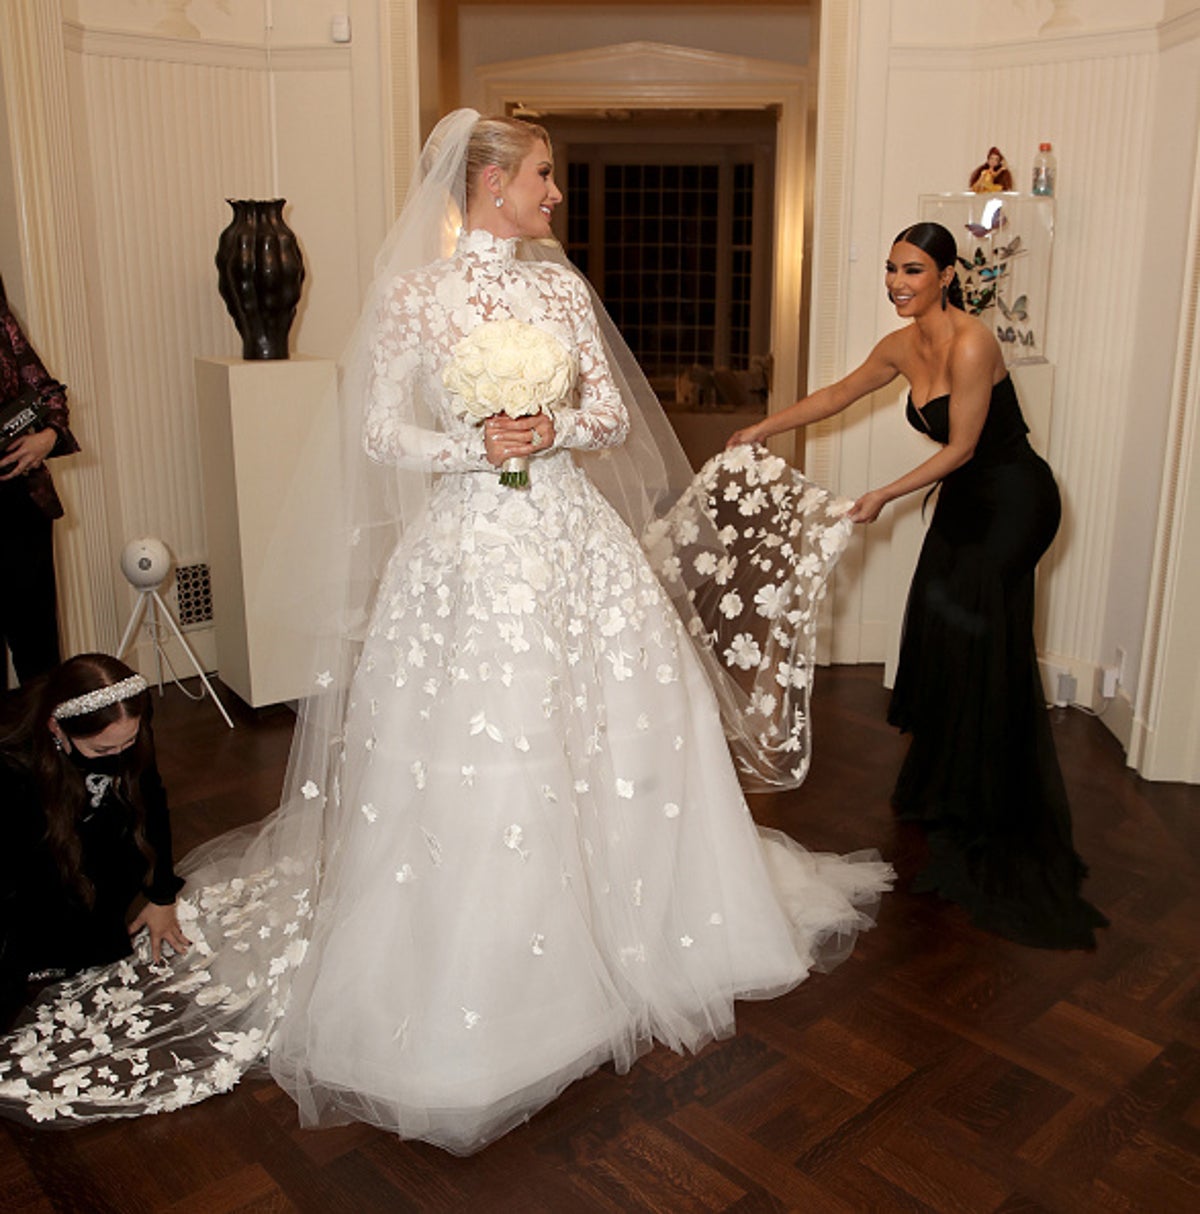 Paris Hilton reveals she had 45 dresses prepped for her wedding but only wore six